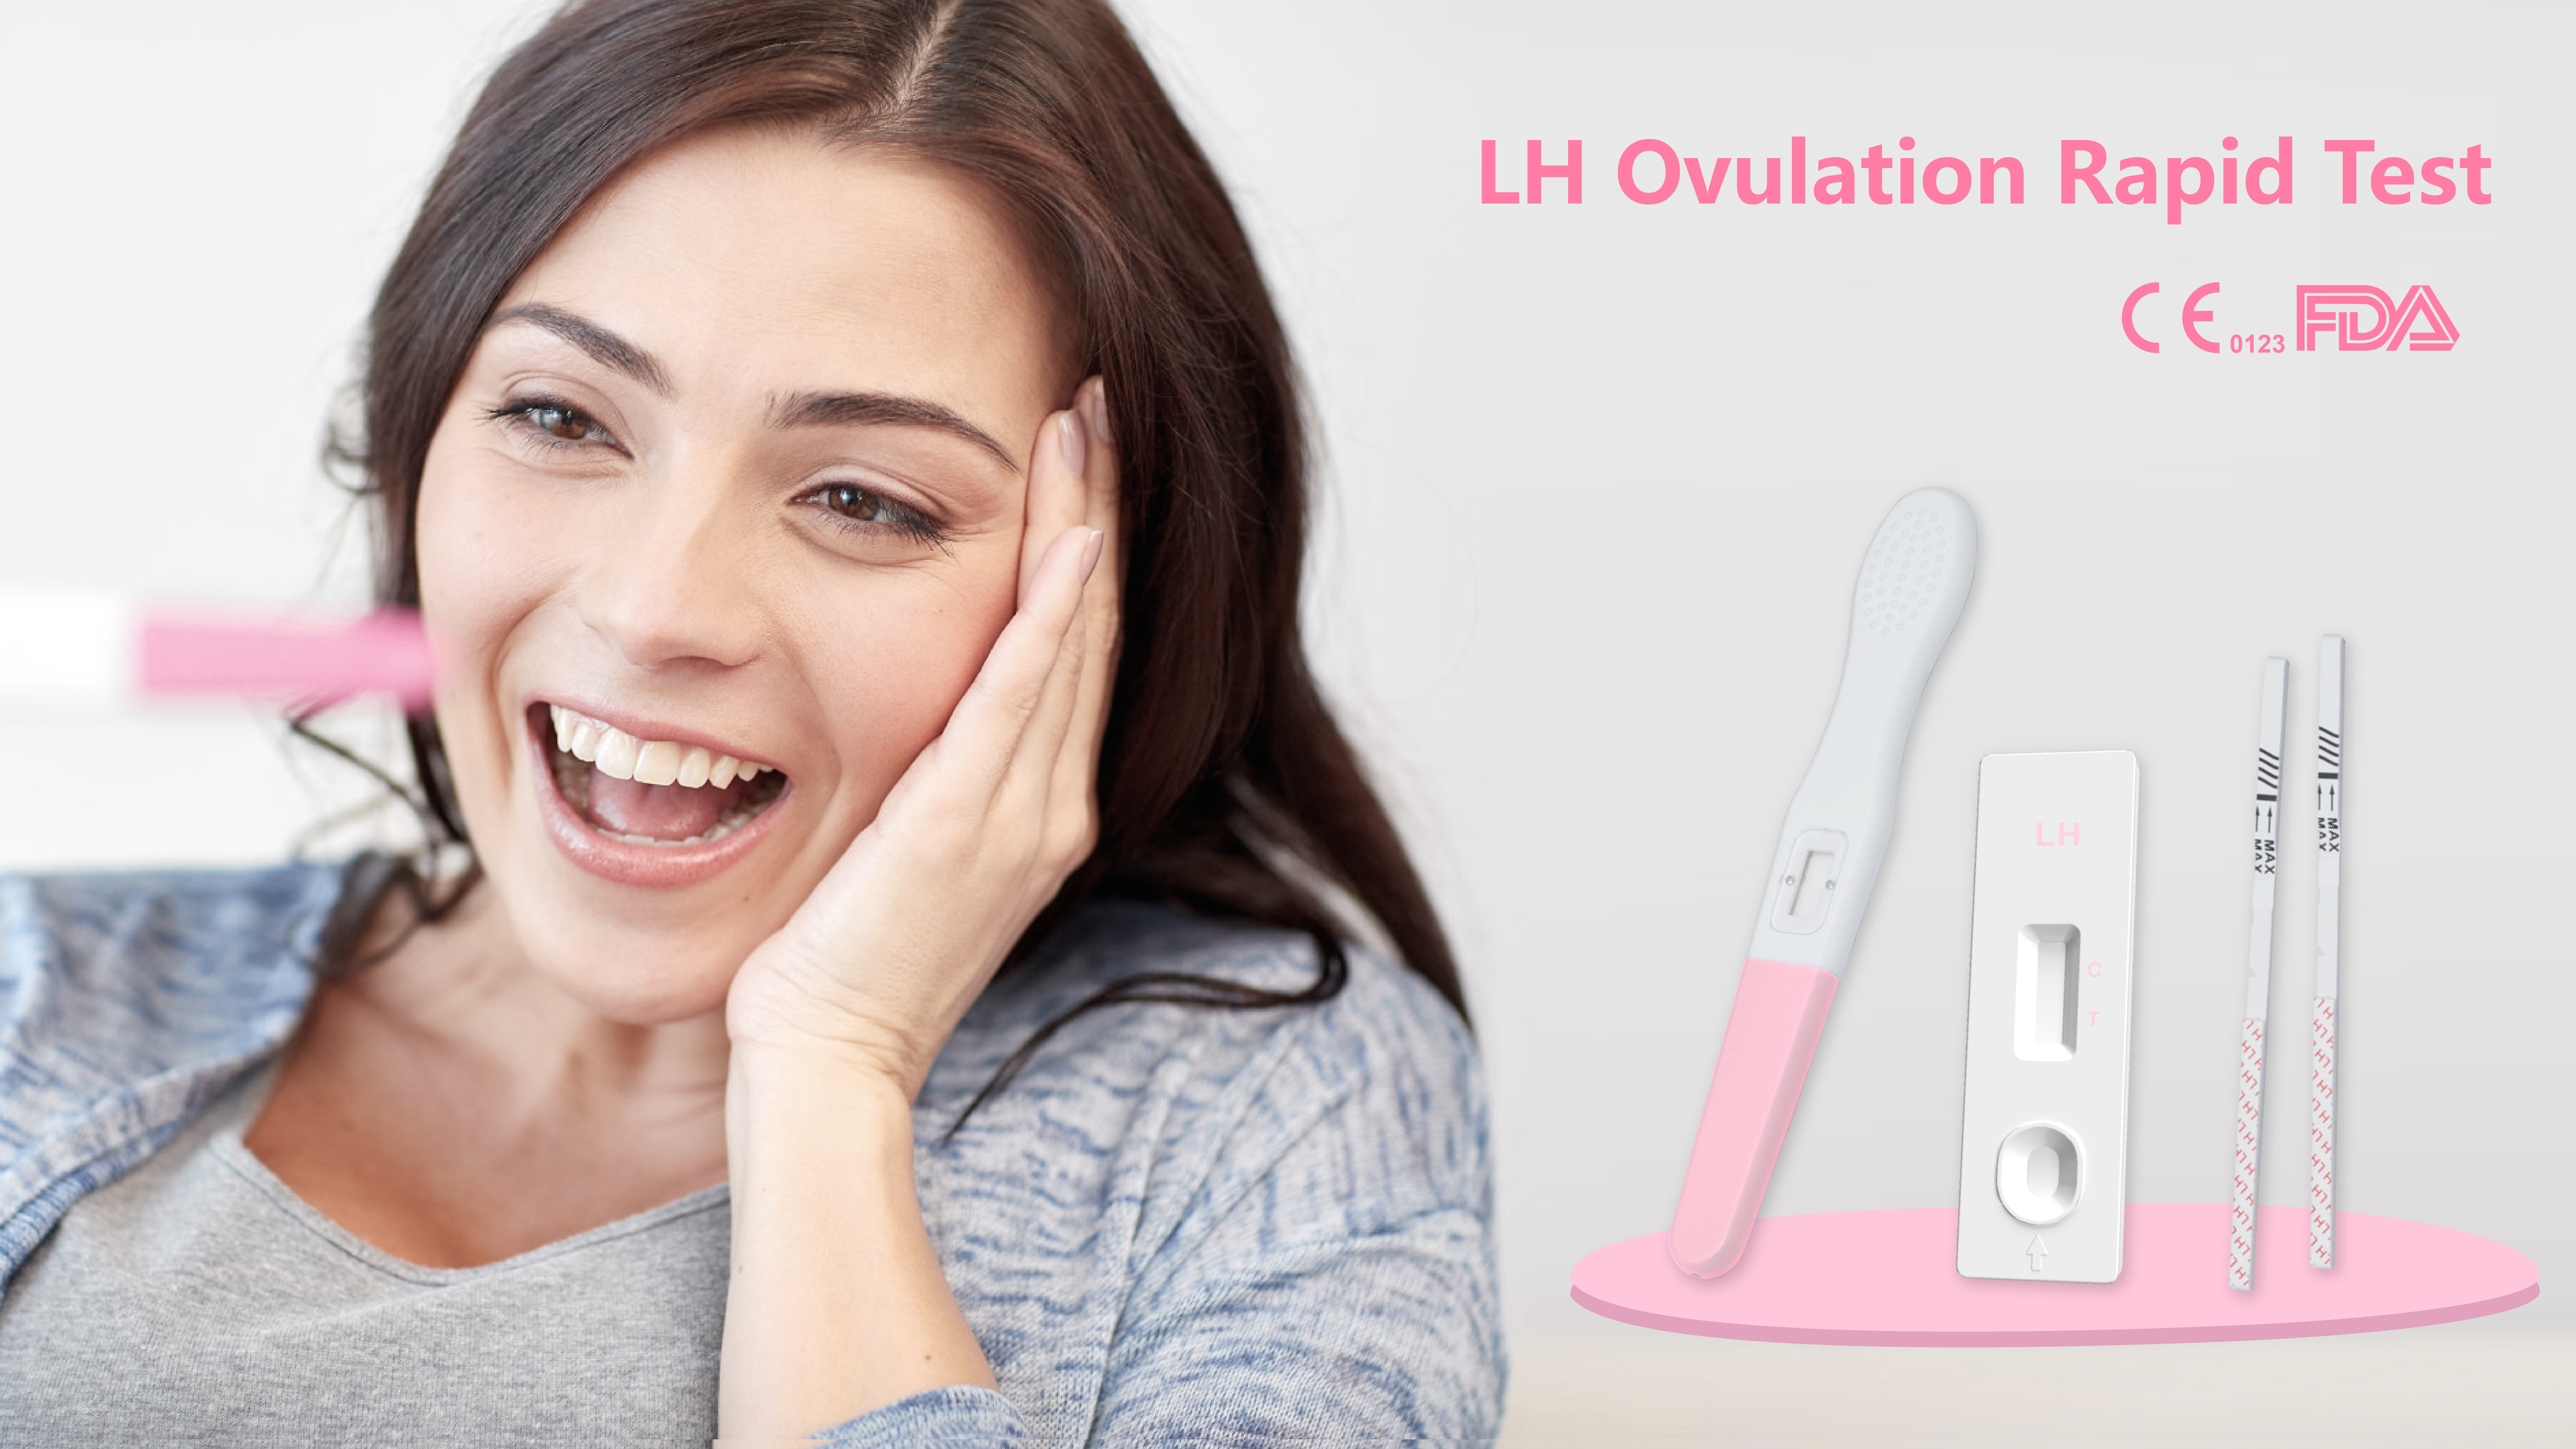 https://www.sejoy.com/convention-fertility-testing-system-lh-ovulation-rapid-test-product/